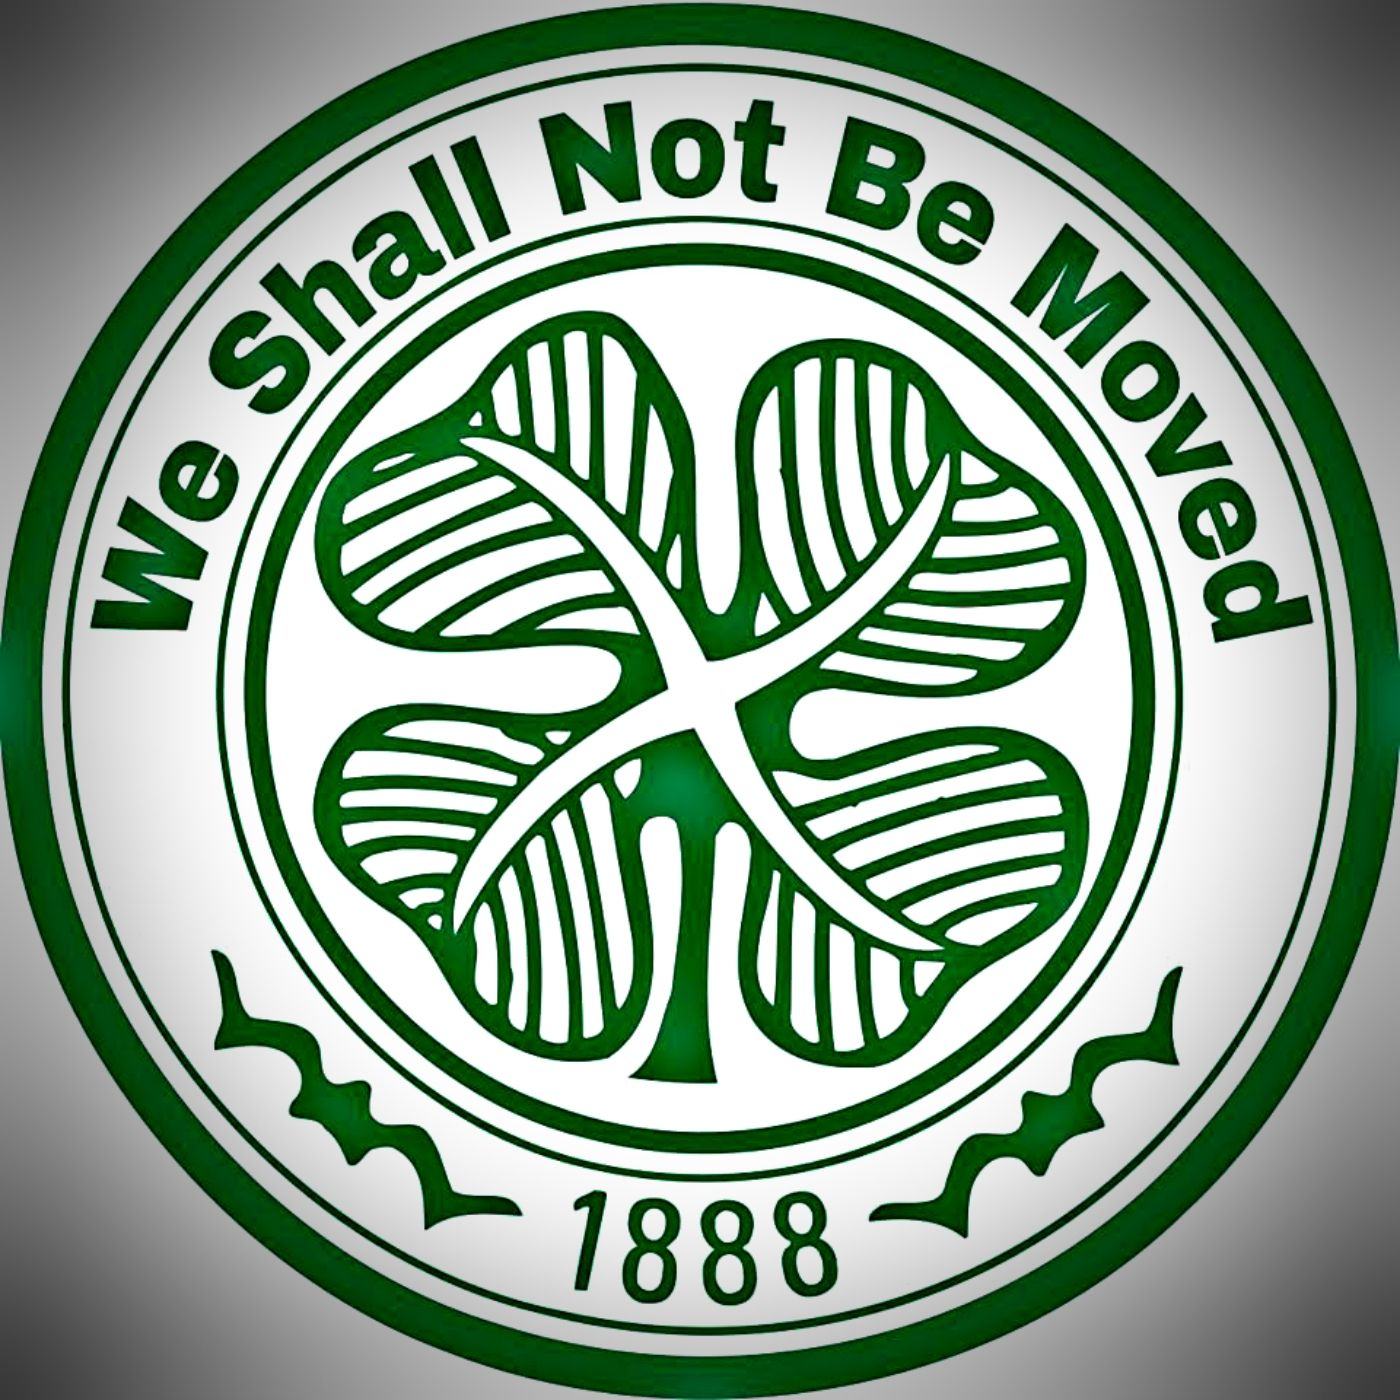 Celtic FC We Shall Not Be Moved Podcast